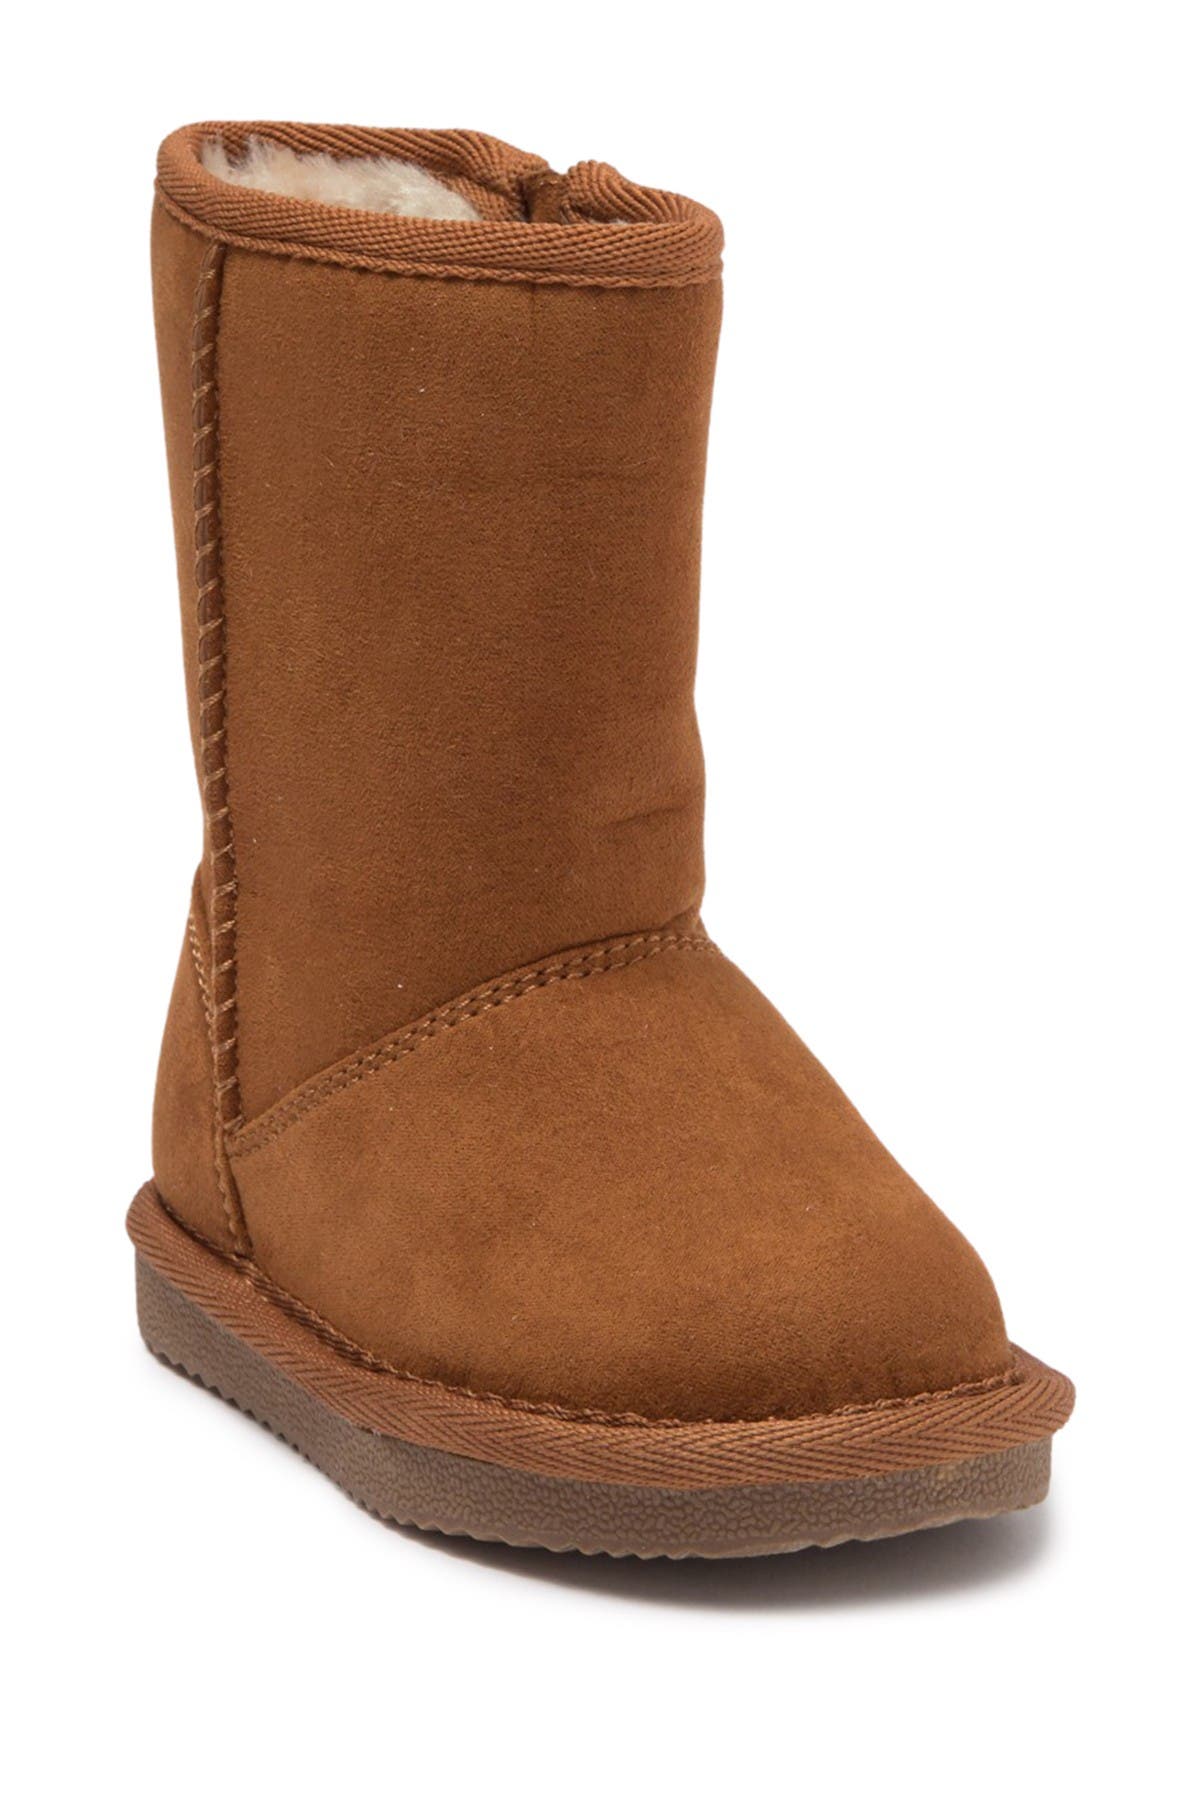 harper canyon boots